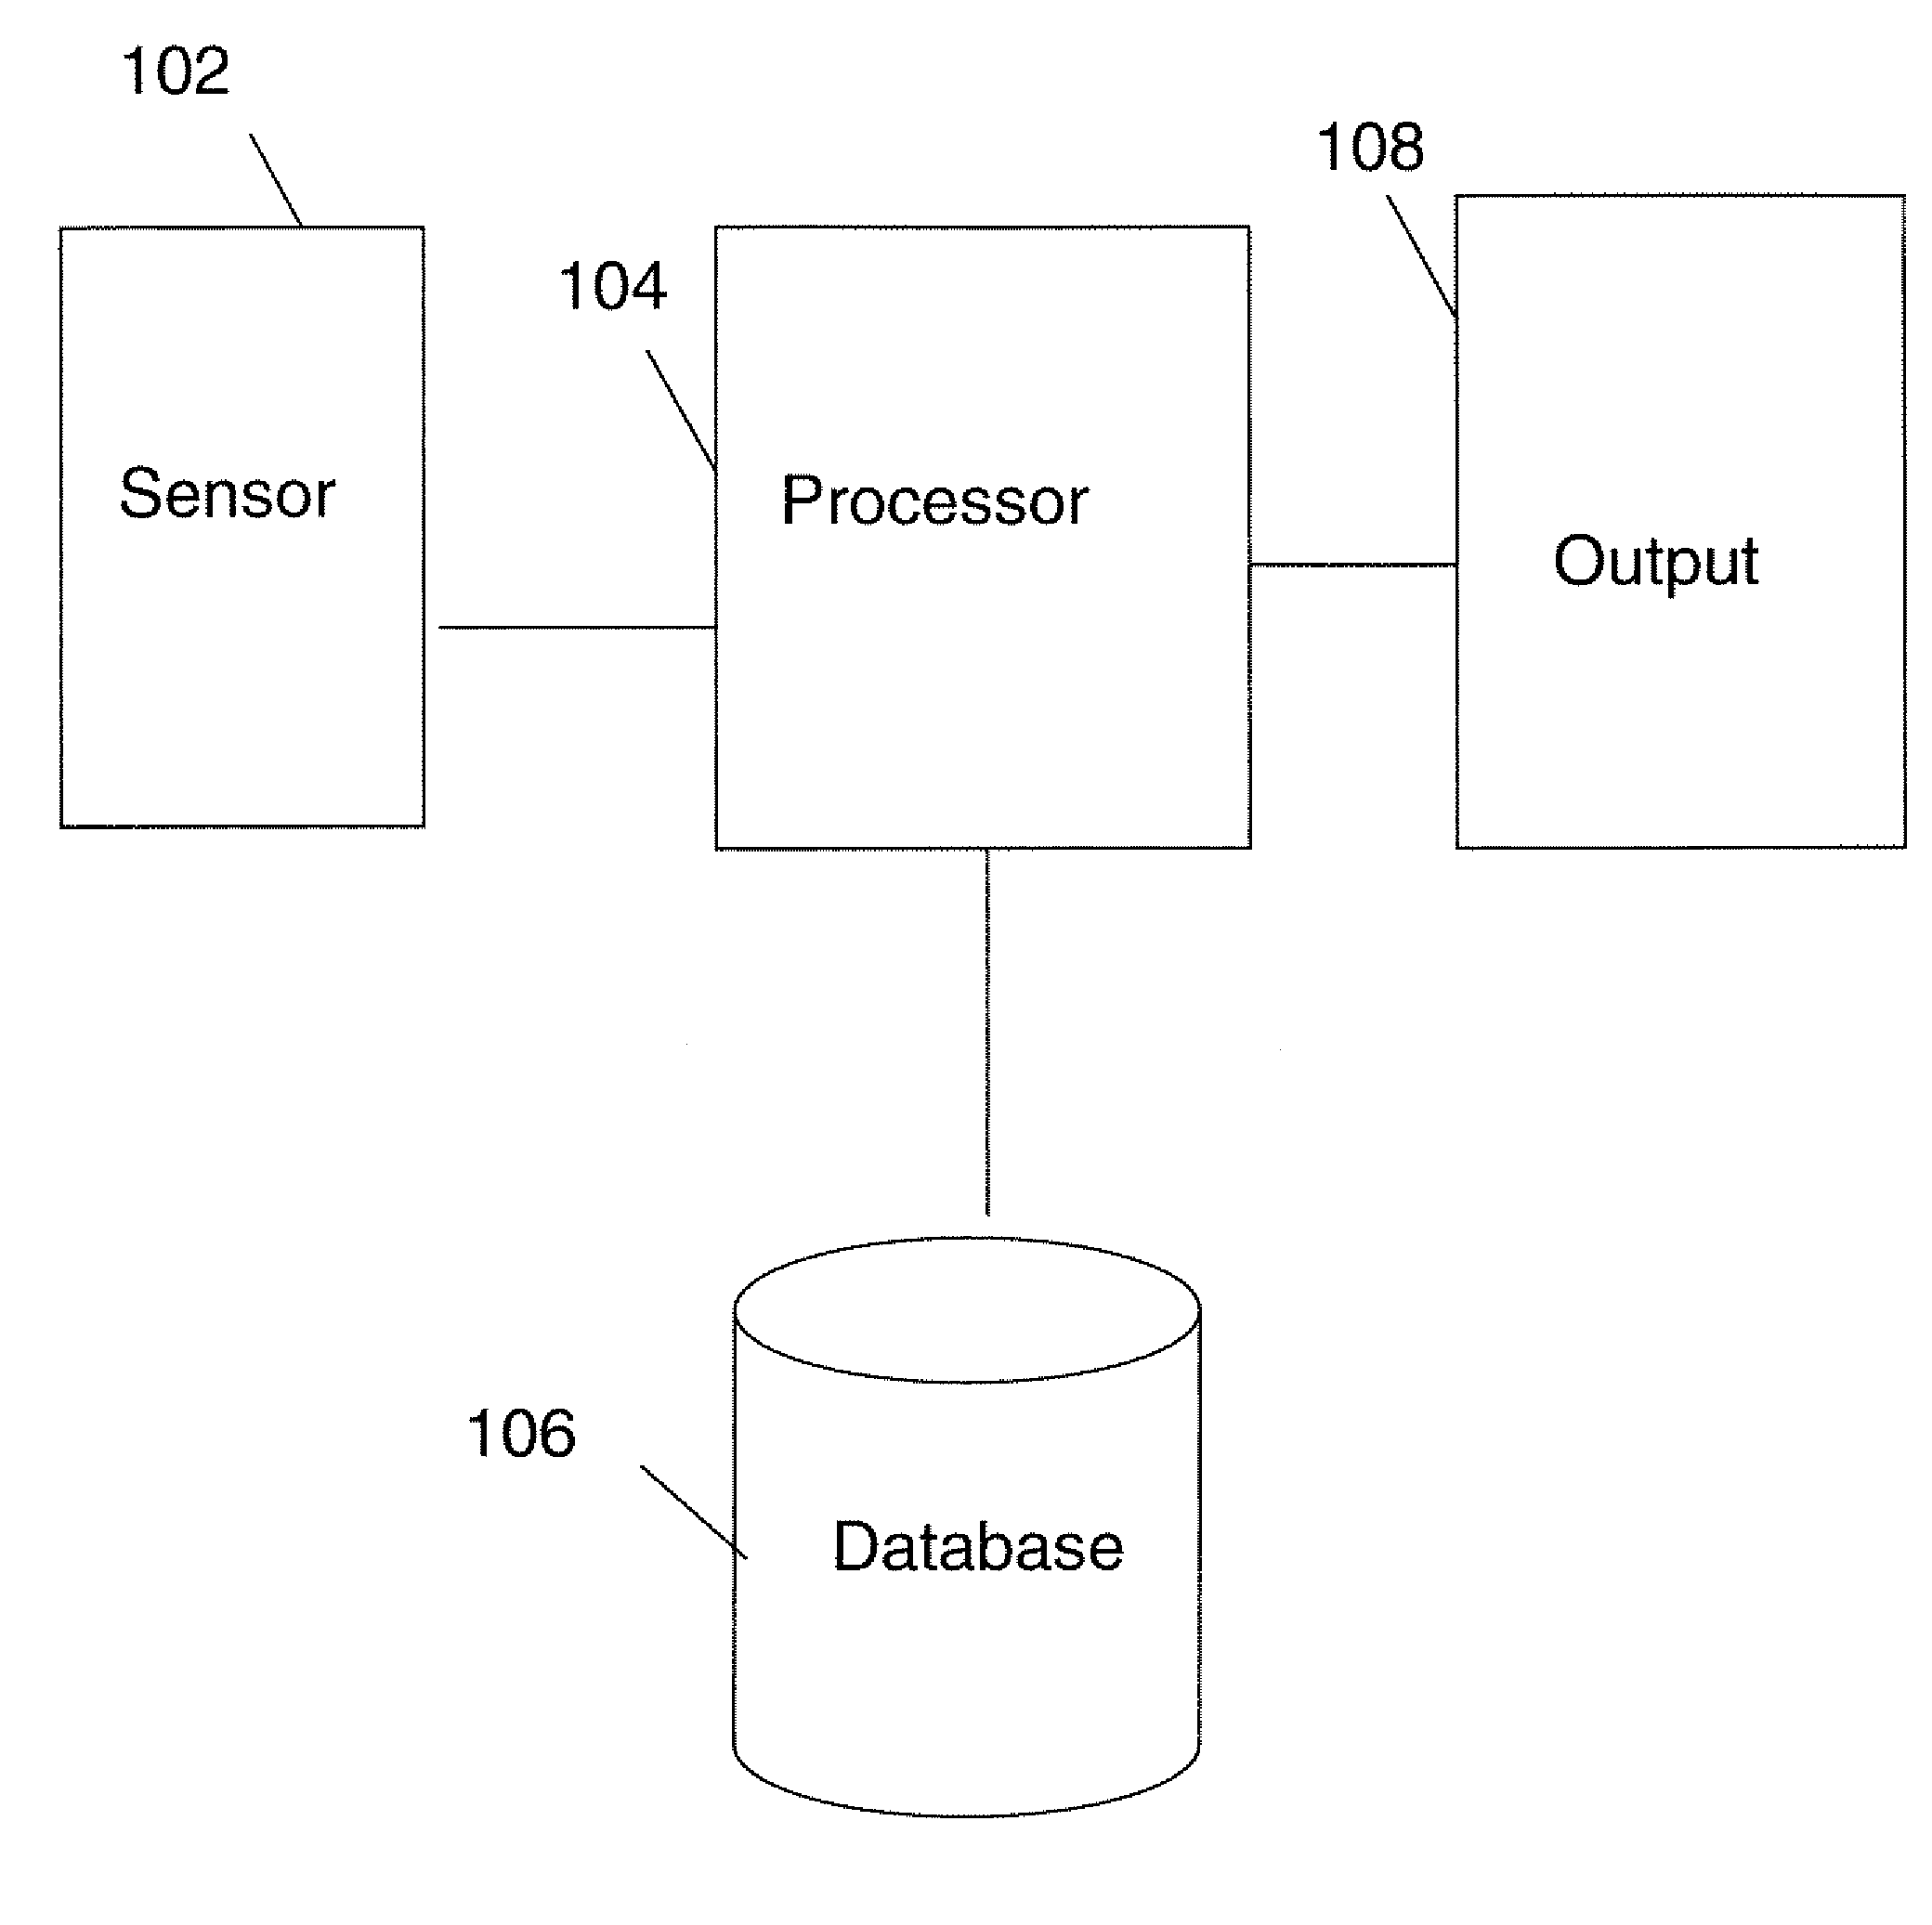 Method for characterizing shape, appearance and motion of an object that is being tracked